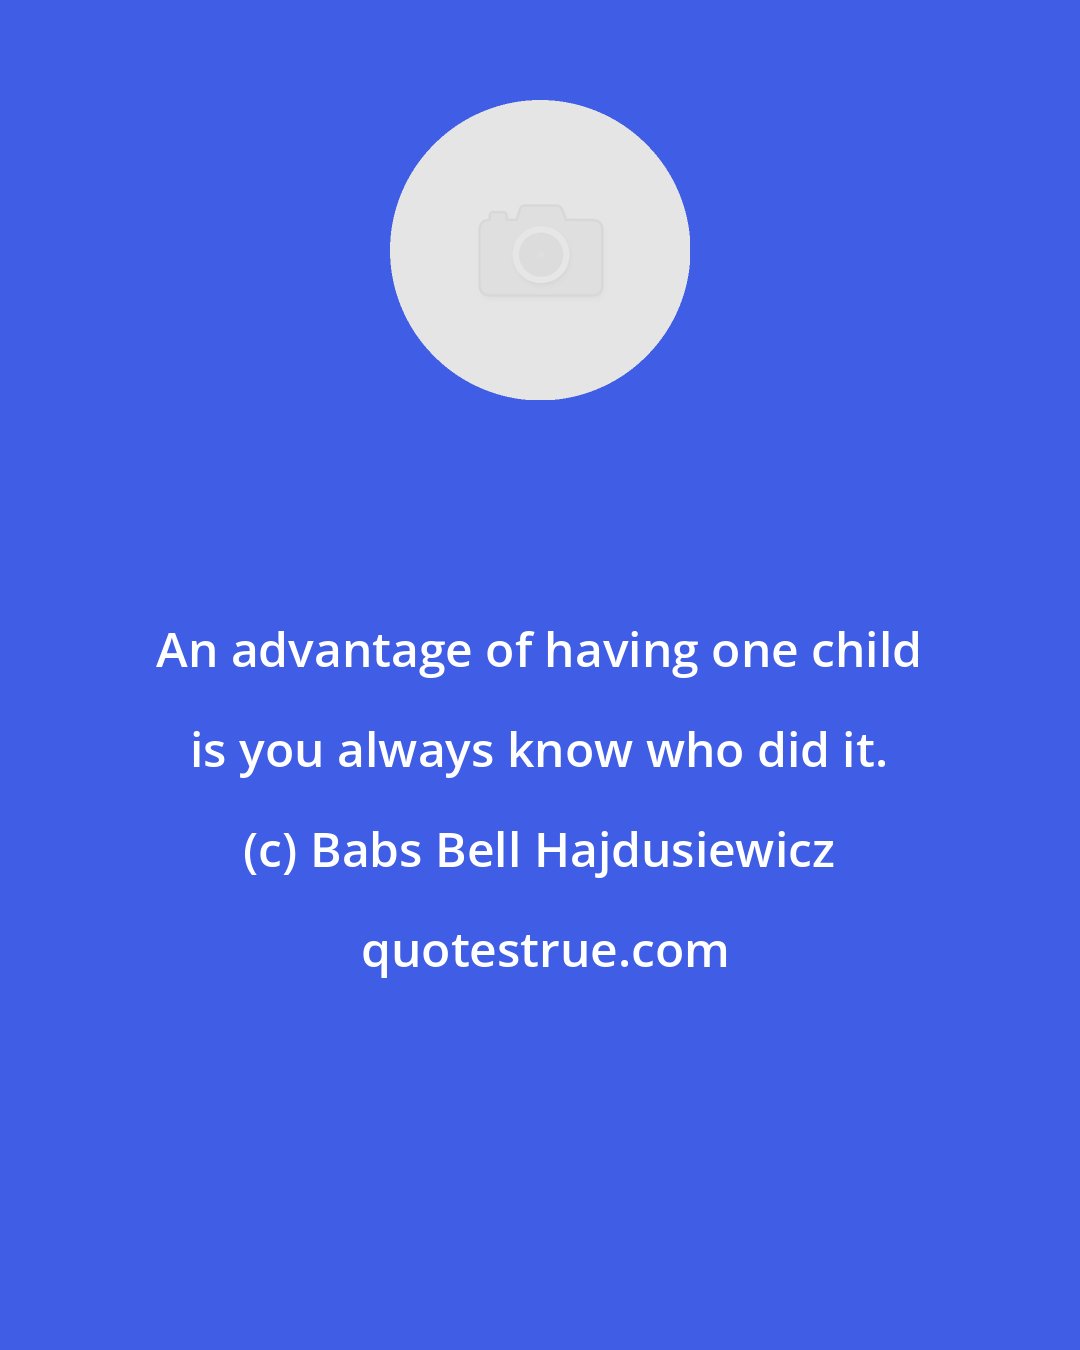 Babs Bell Hajdusiewicz: An advantage of having one child is you always know who did it.